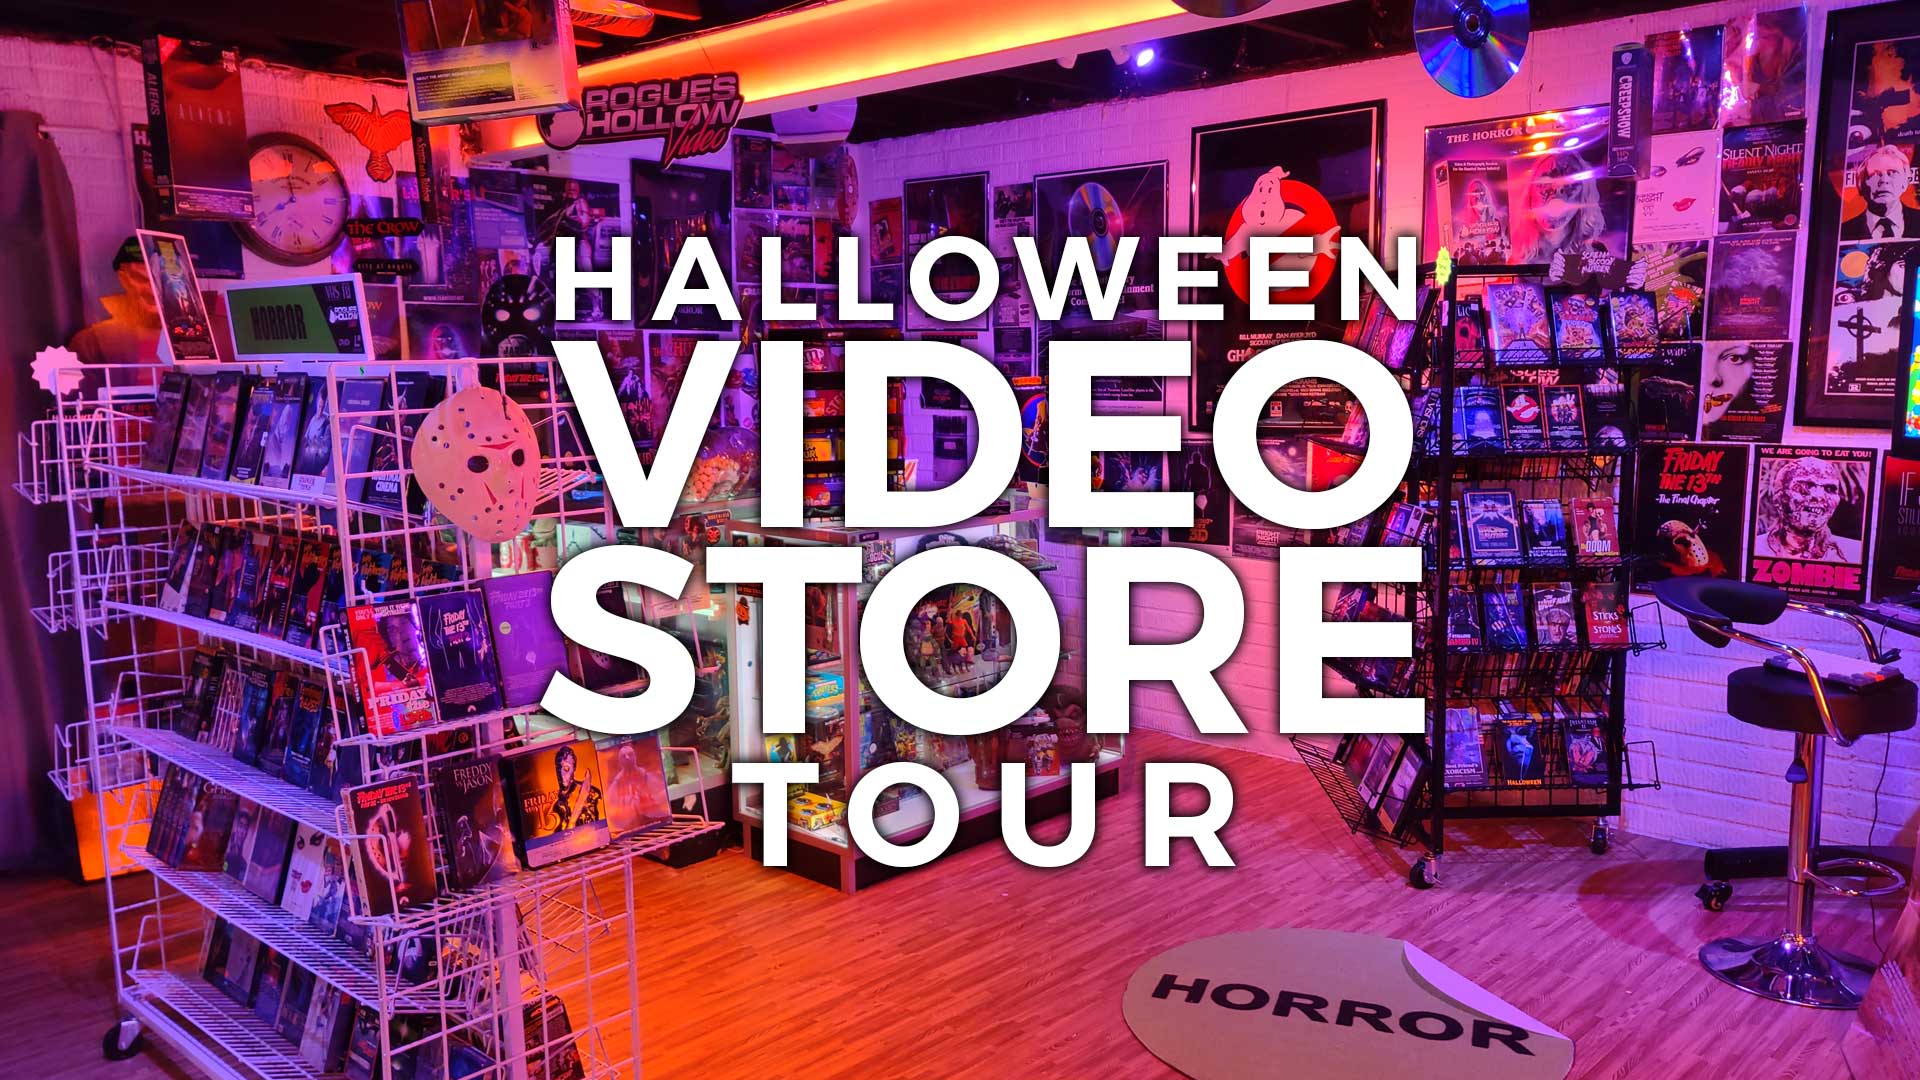 Rogues Hollow Video Store Halloween Tour Rogues Hollow Video